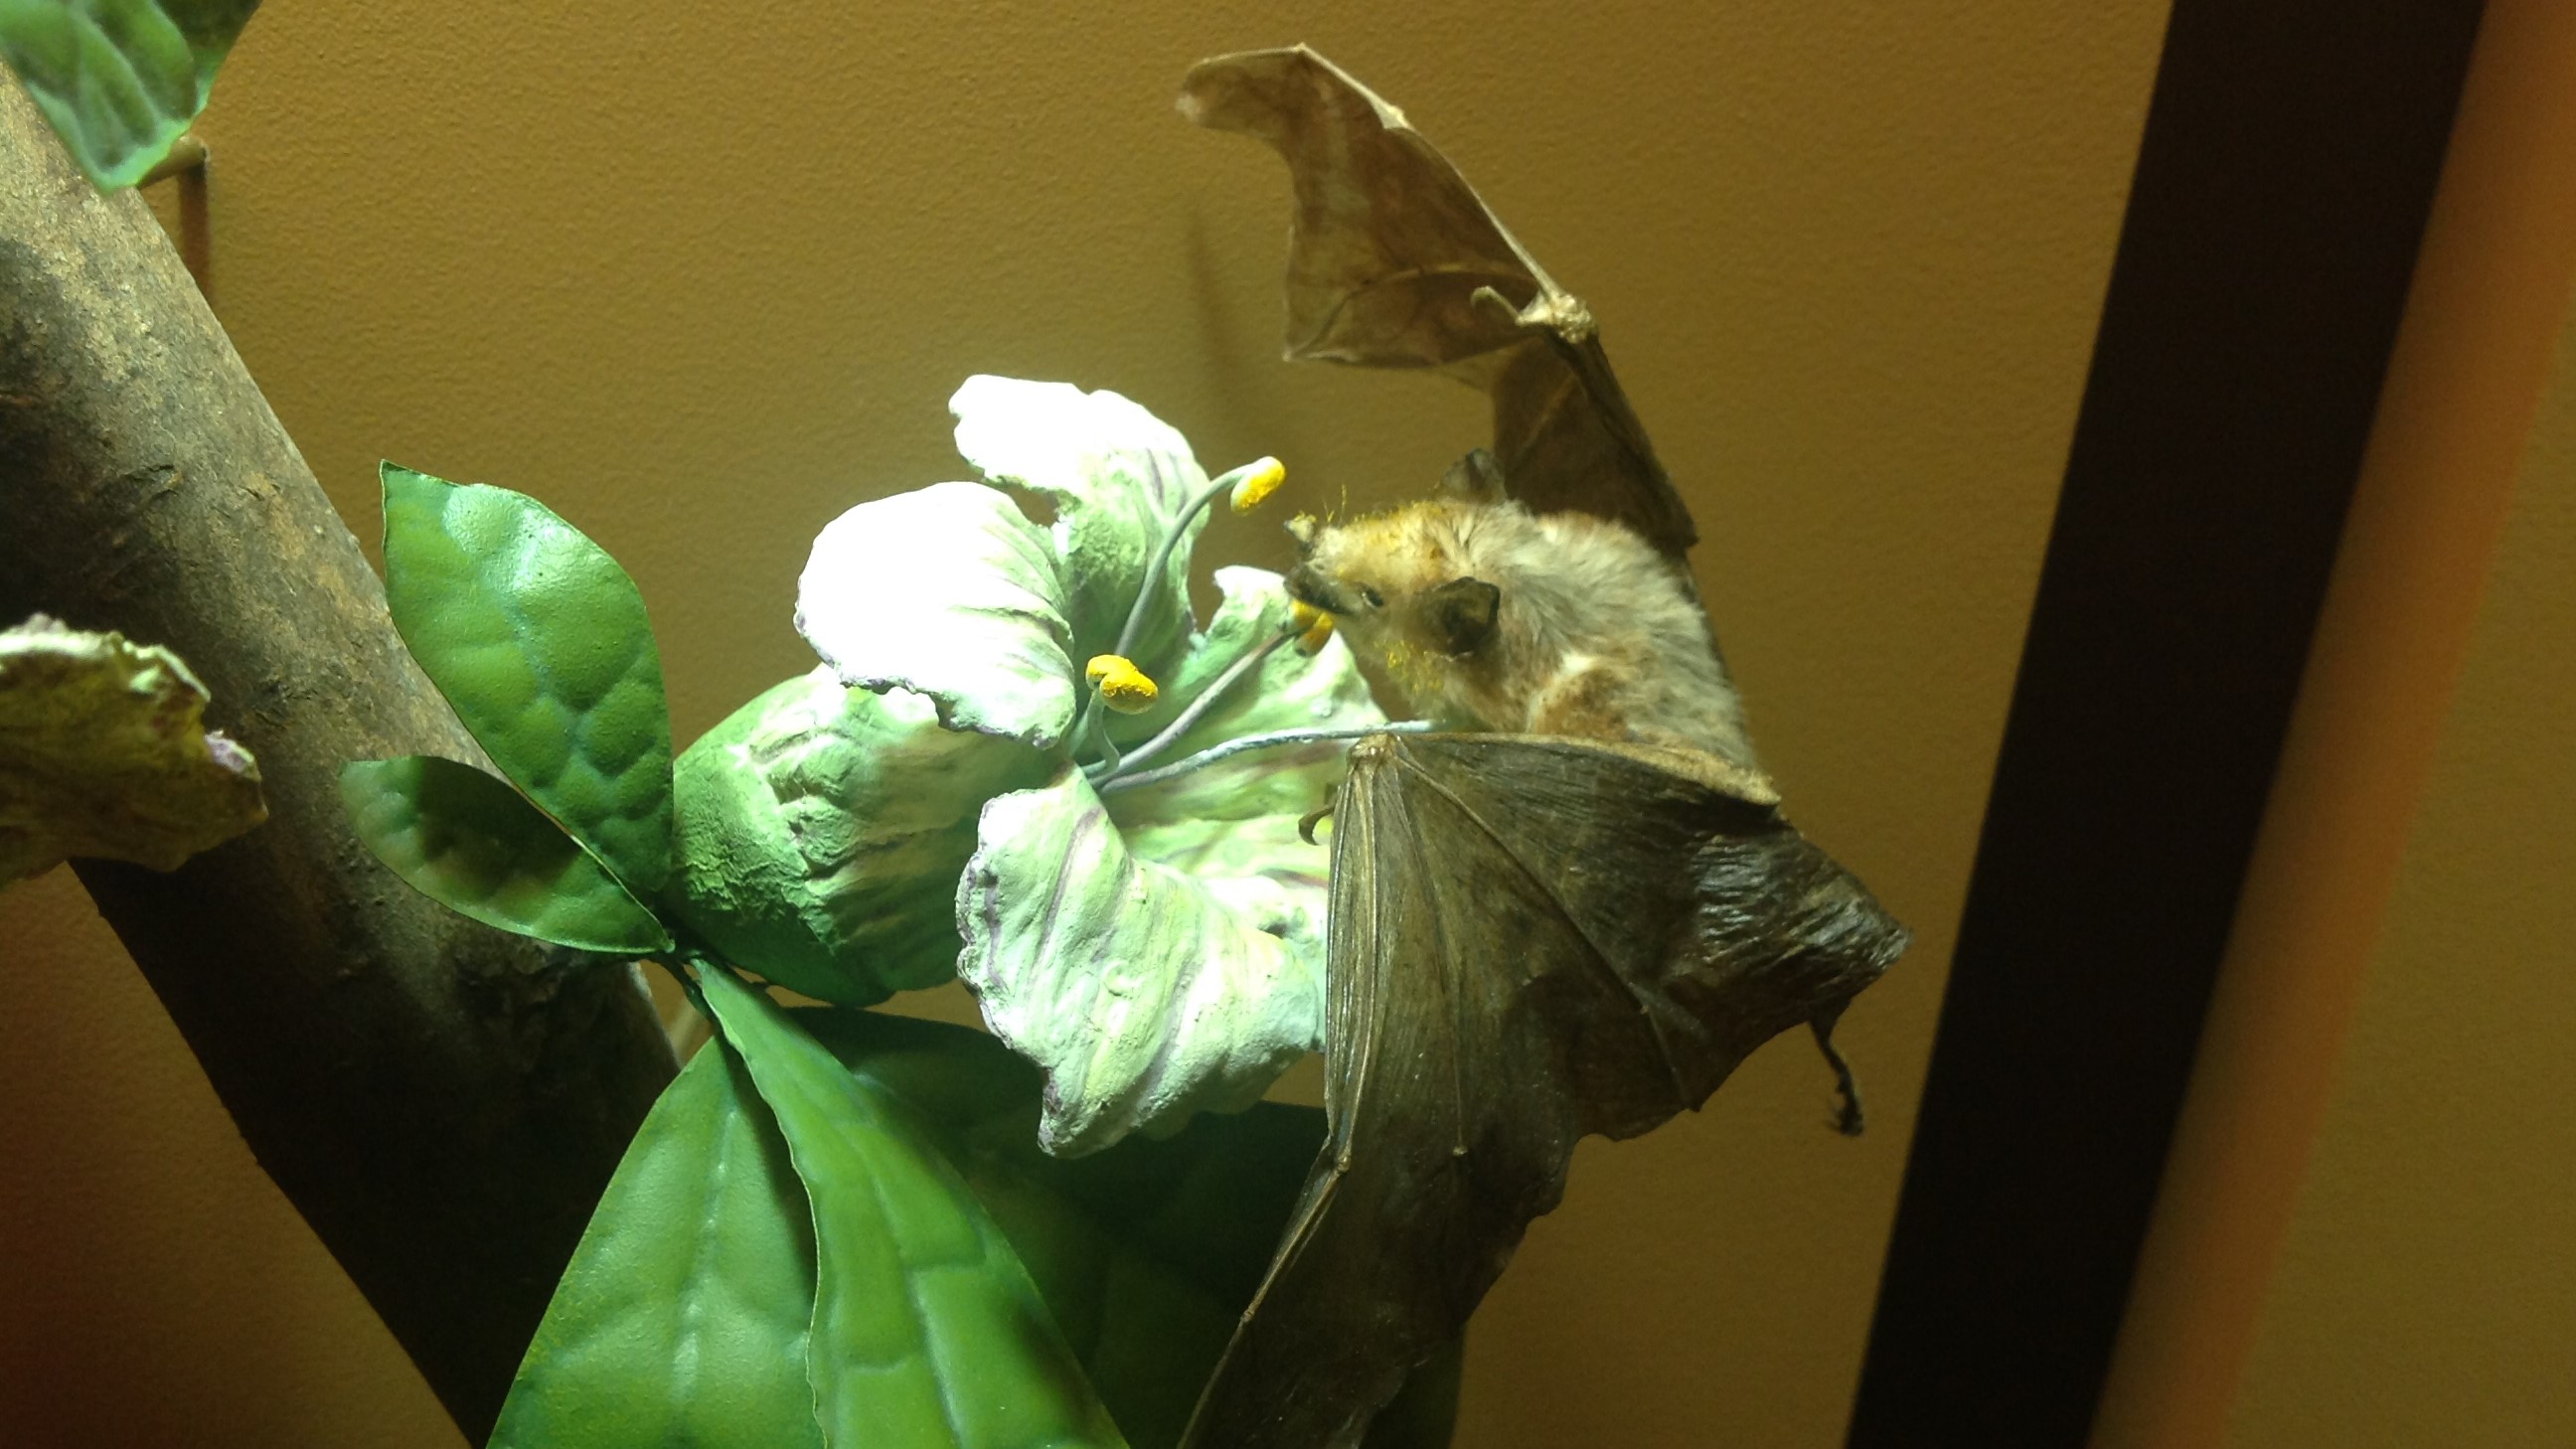 A small brown bat with spread wings perches on a large white flower to drink its nectar.